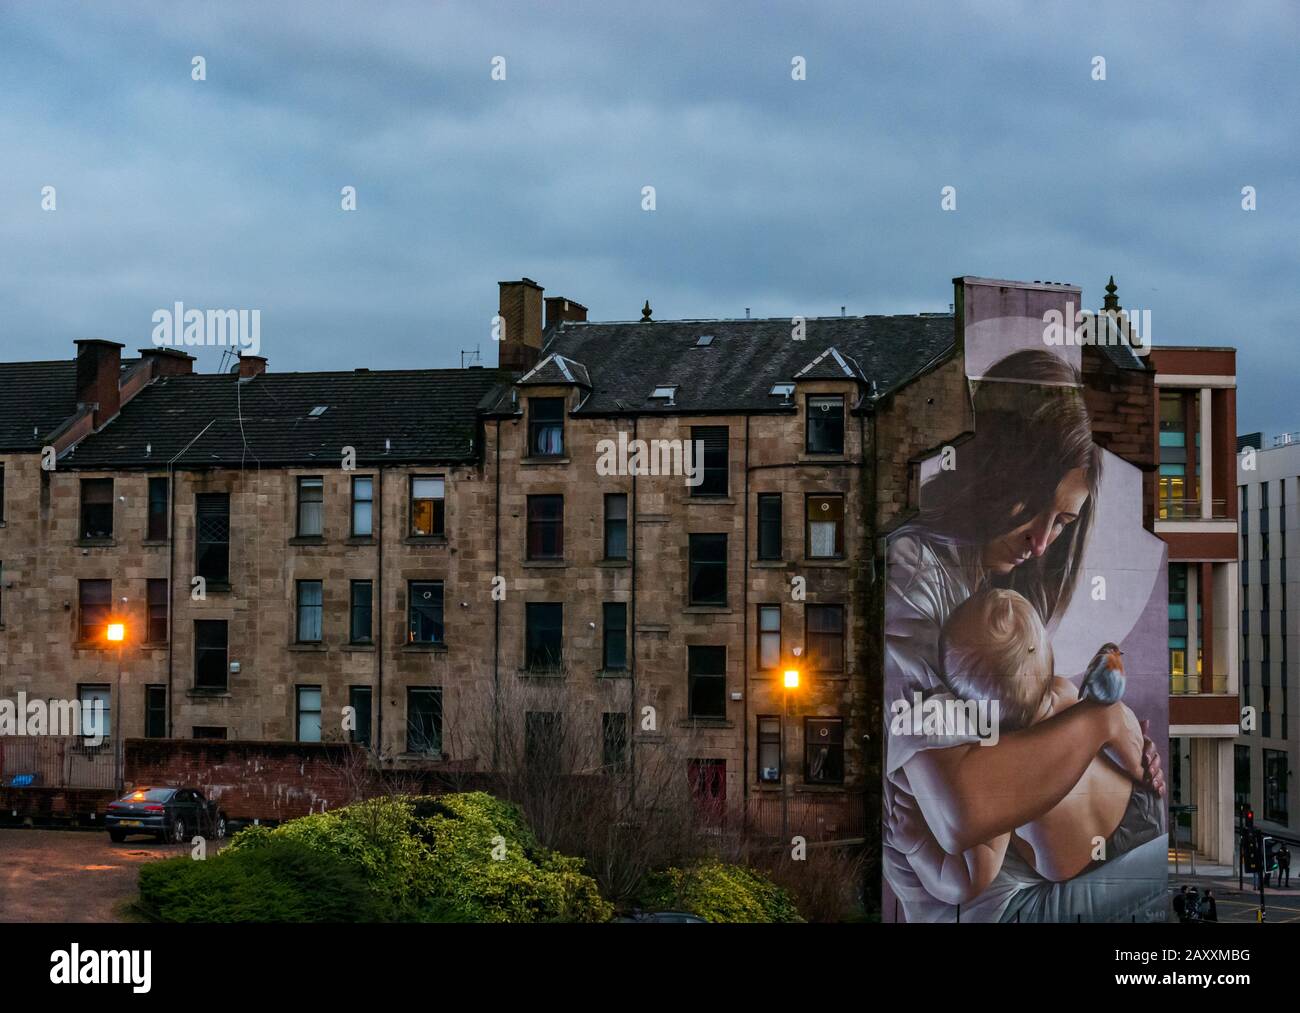 Large mural called St Enoch and Child by Smug street artist at dusk with tenement buildings, Glasgow, Scotland, UK Stock Photo